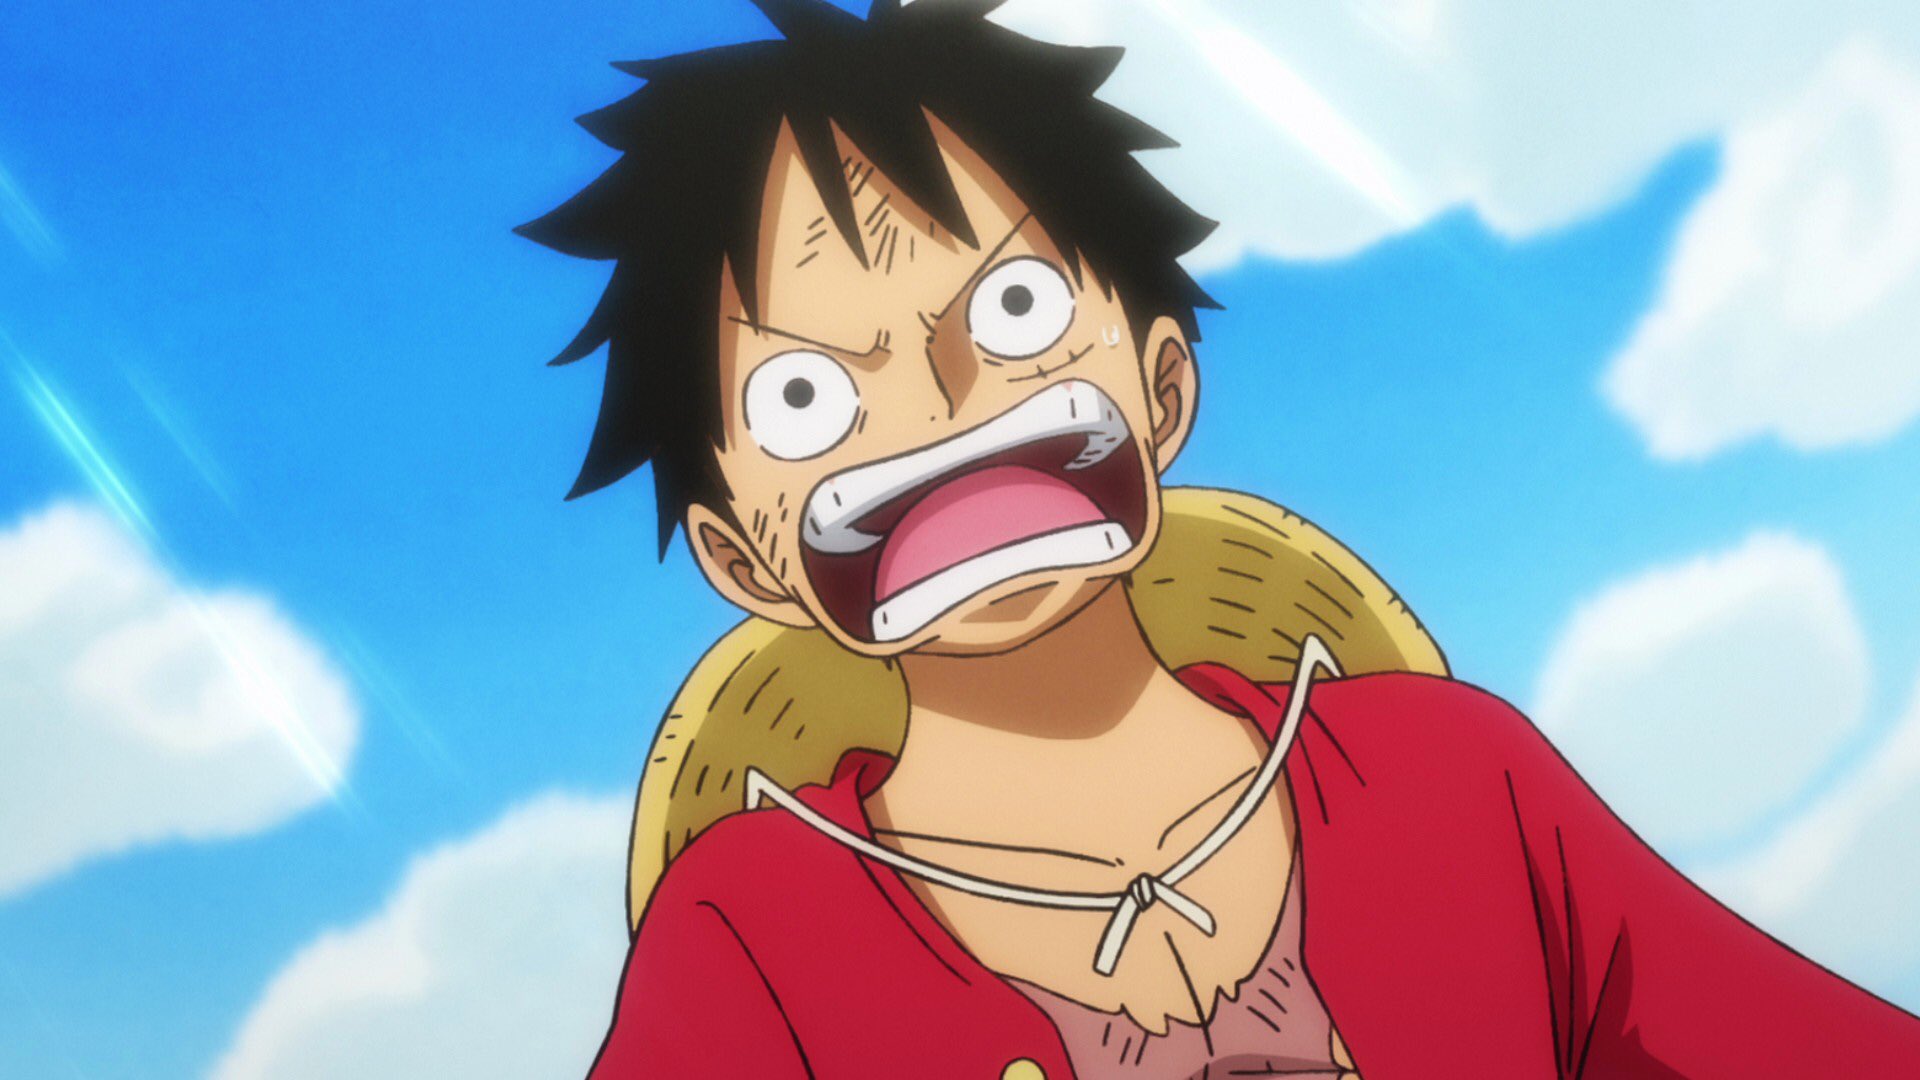 One Piece スタッフ 公式 Official Twitter पर ご視聴ありがとうございました 見逃し配信は Tver Fodにて ワンピース 2 ワノ国 桜舞うサムライの国へ Tver ワンピース T Co 9ljch1mlvz Onepiece ワノ国 T Co Rp76ogleku